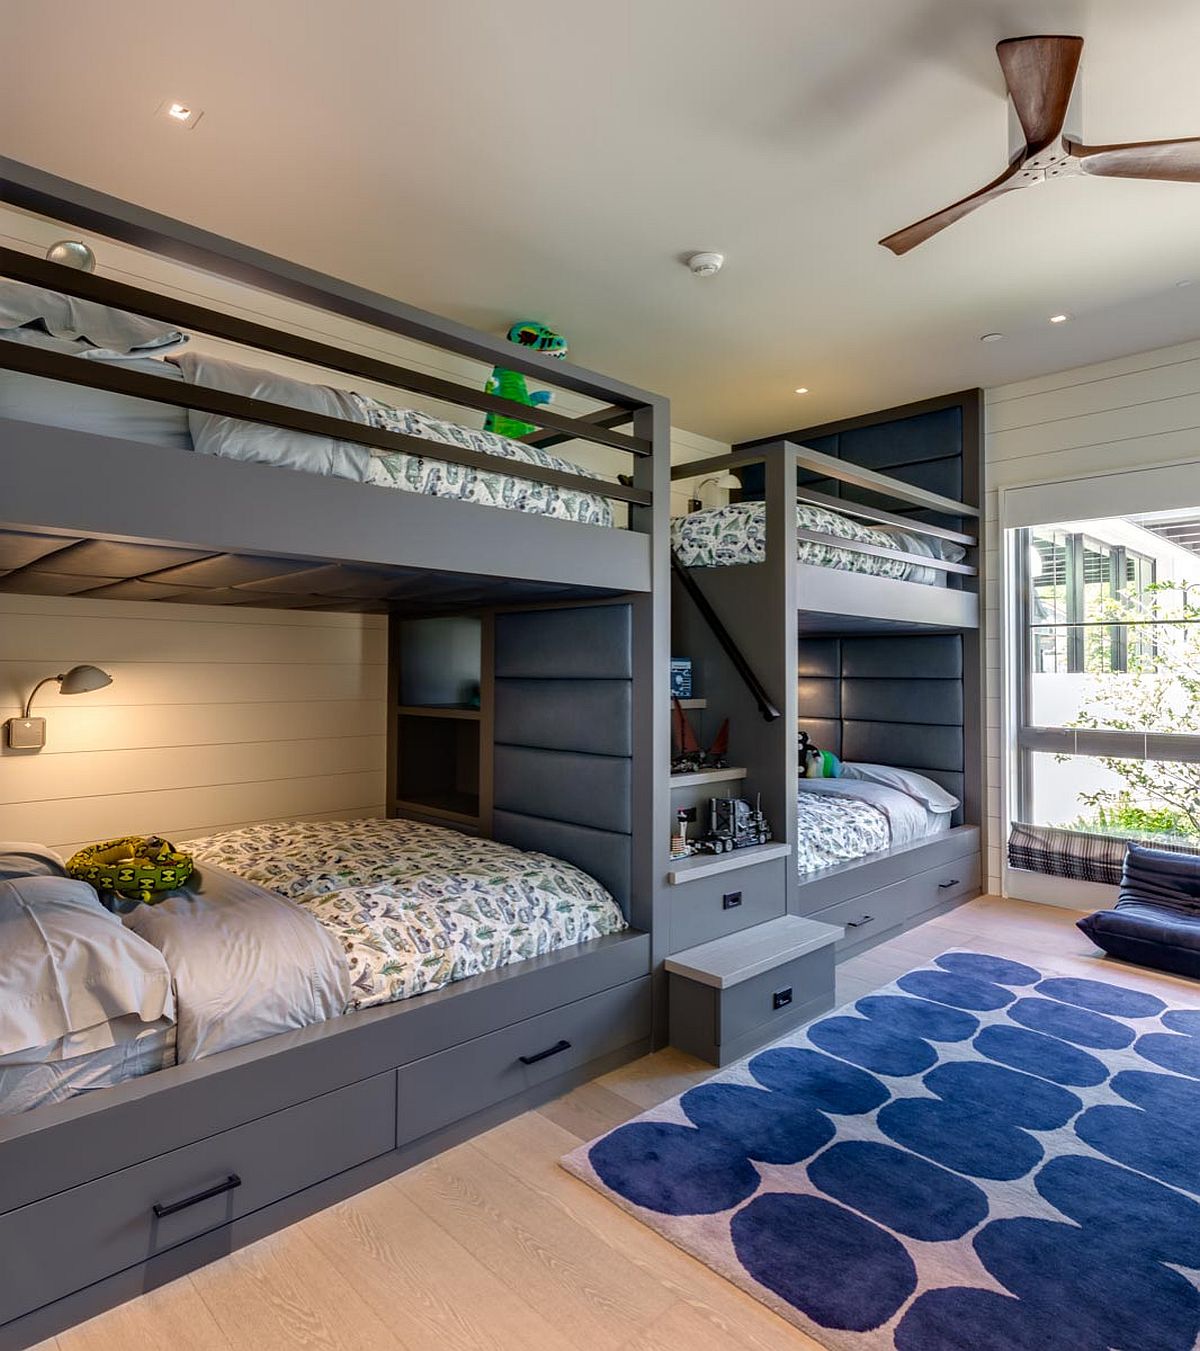 Bespoke wooden bunk beds in gray occupy one side of the room leaving the other free